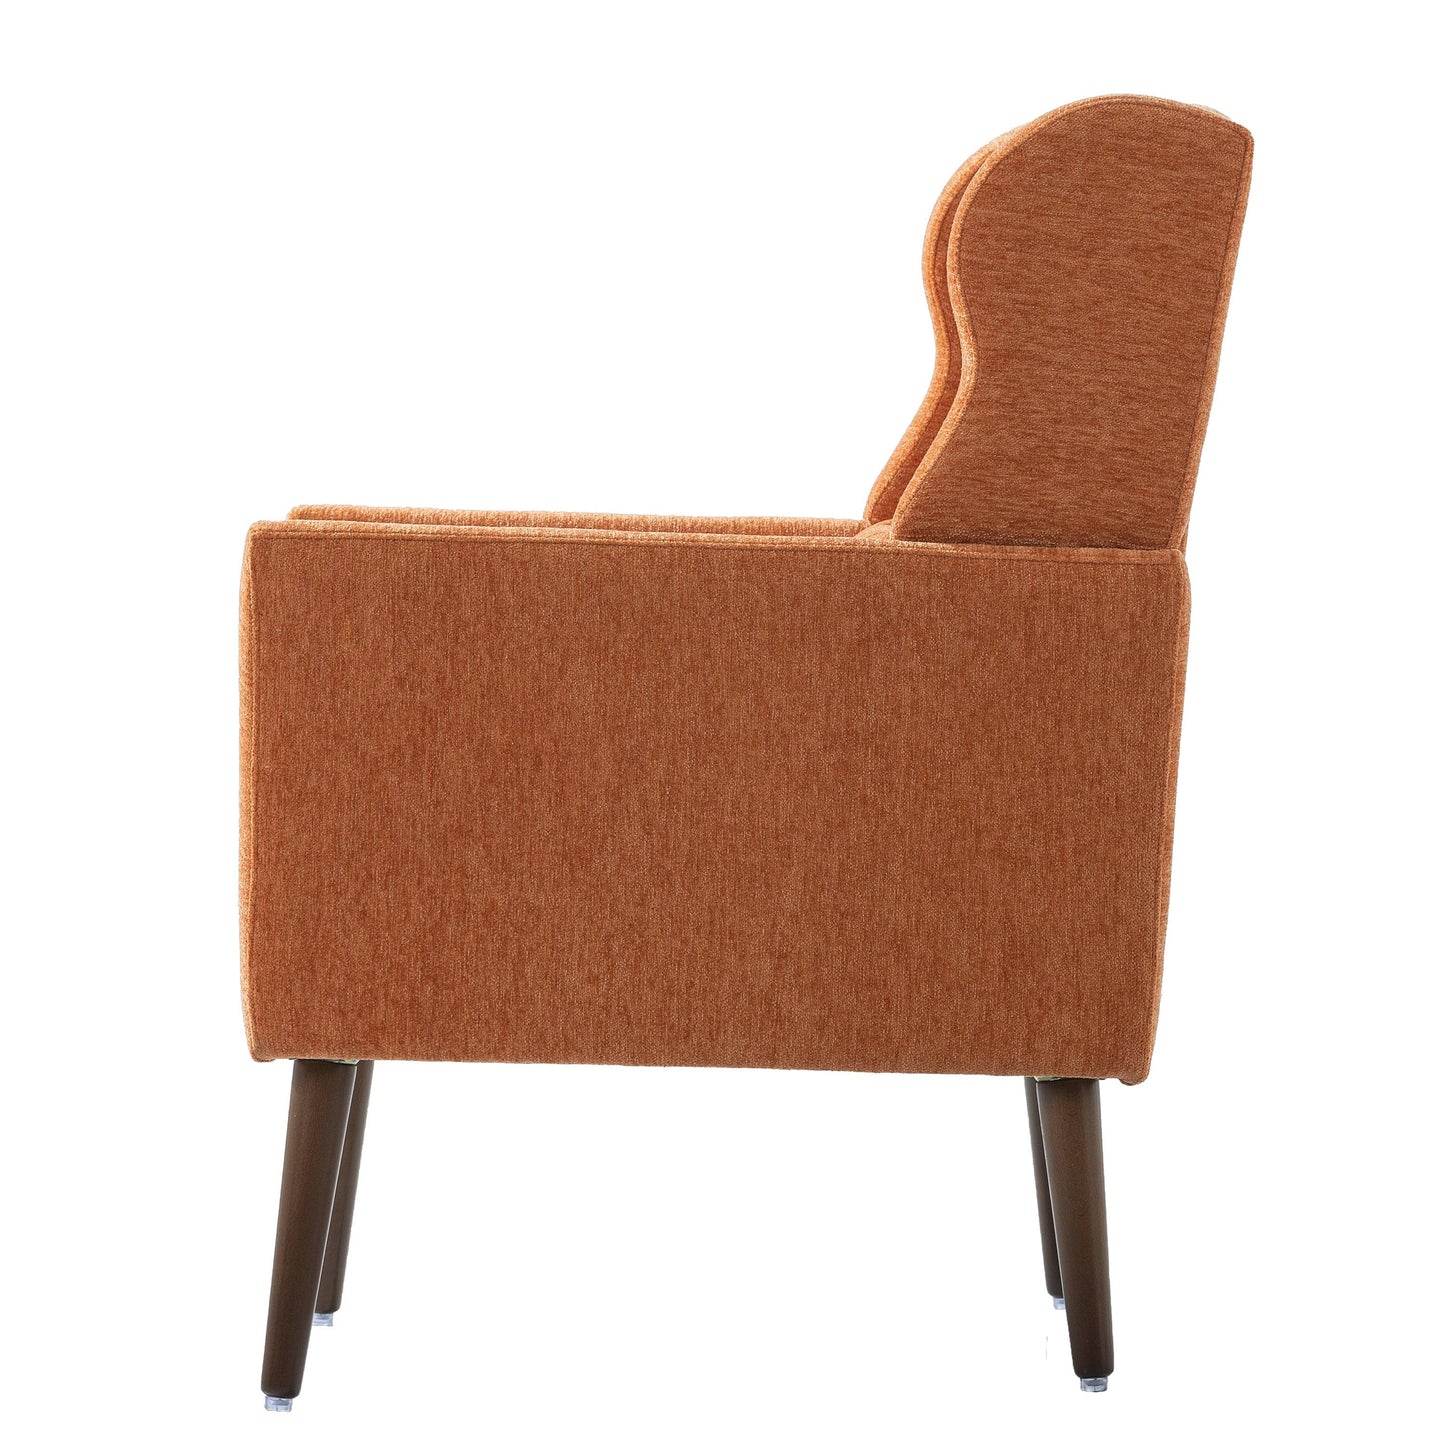 Modern Accent Chair Upholstered Foam Filled Living Room Chairs Comfy Reading Chair Mid Century Modern Chair (Orange) - FurniFindUSA